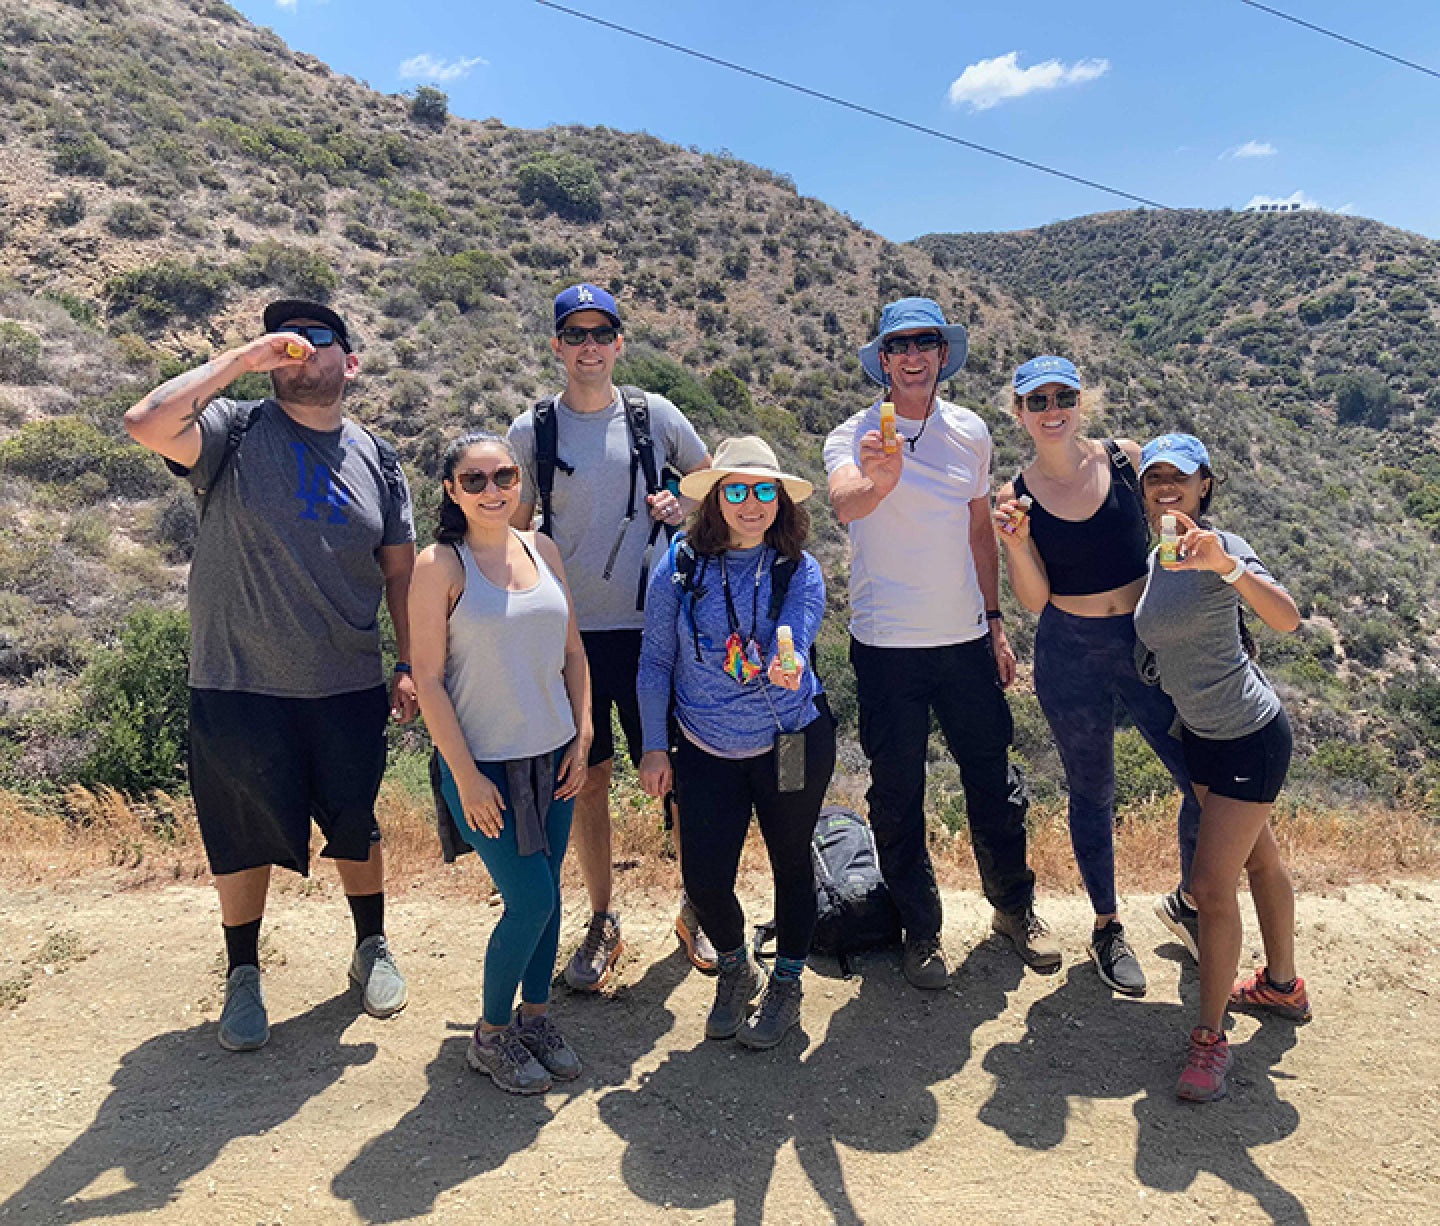 vive team members taking Vive shots in the mountains on a hike